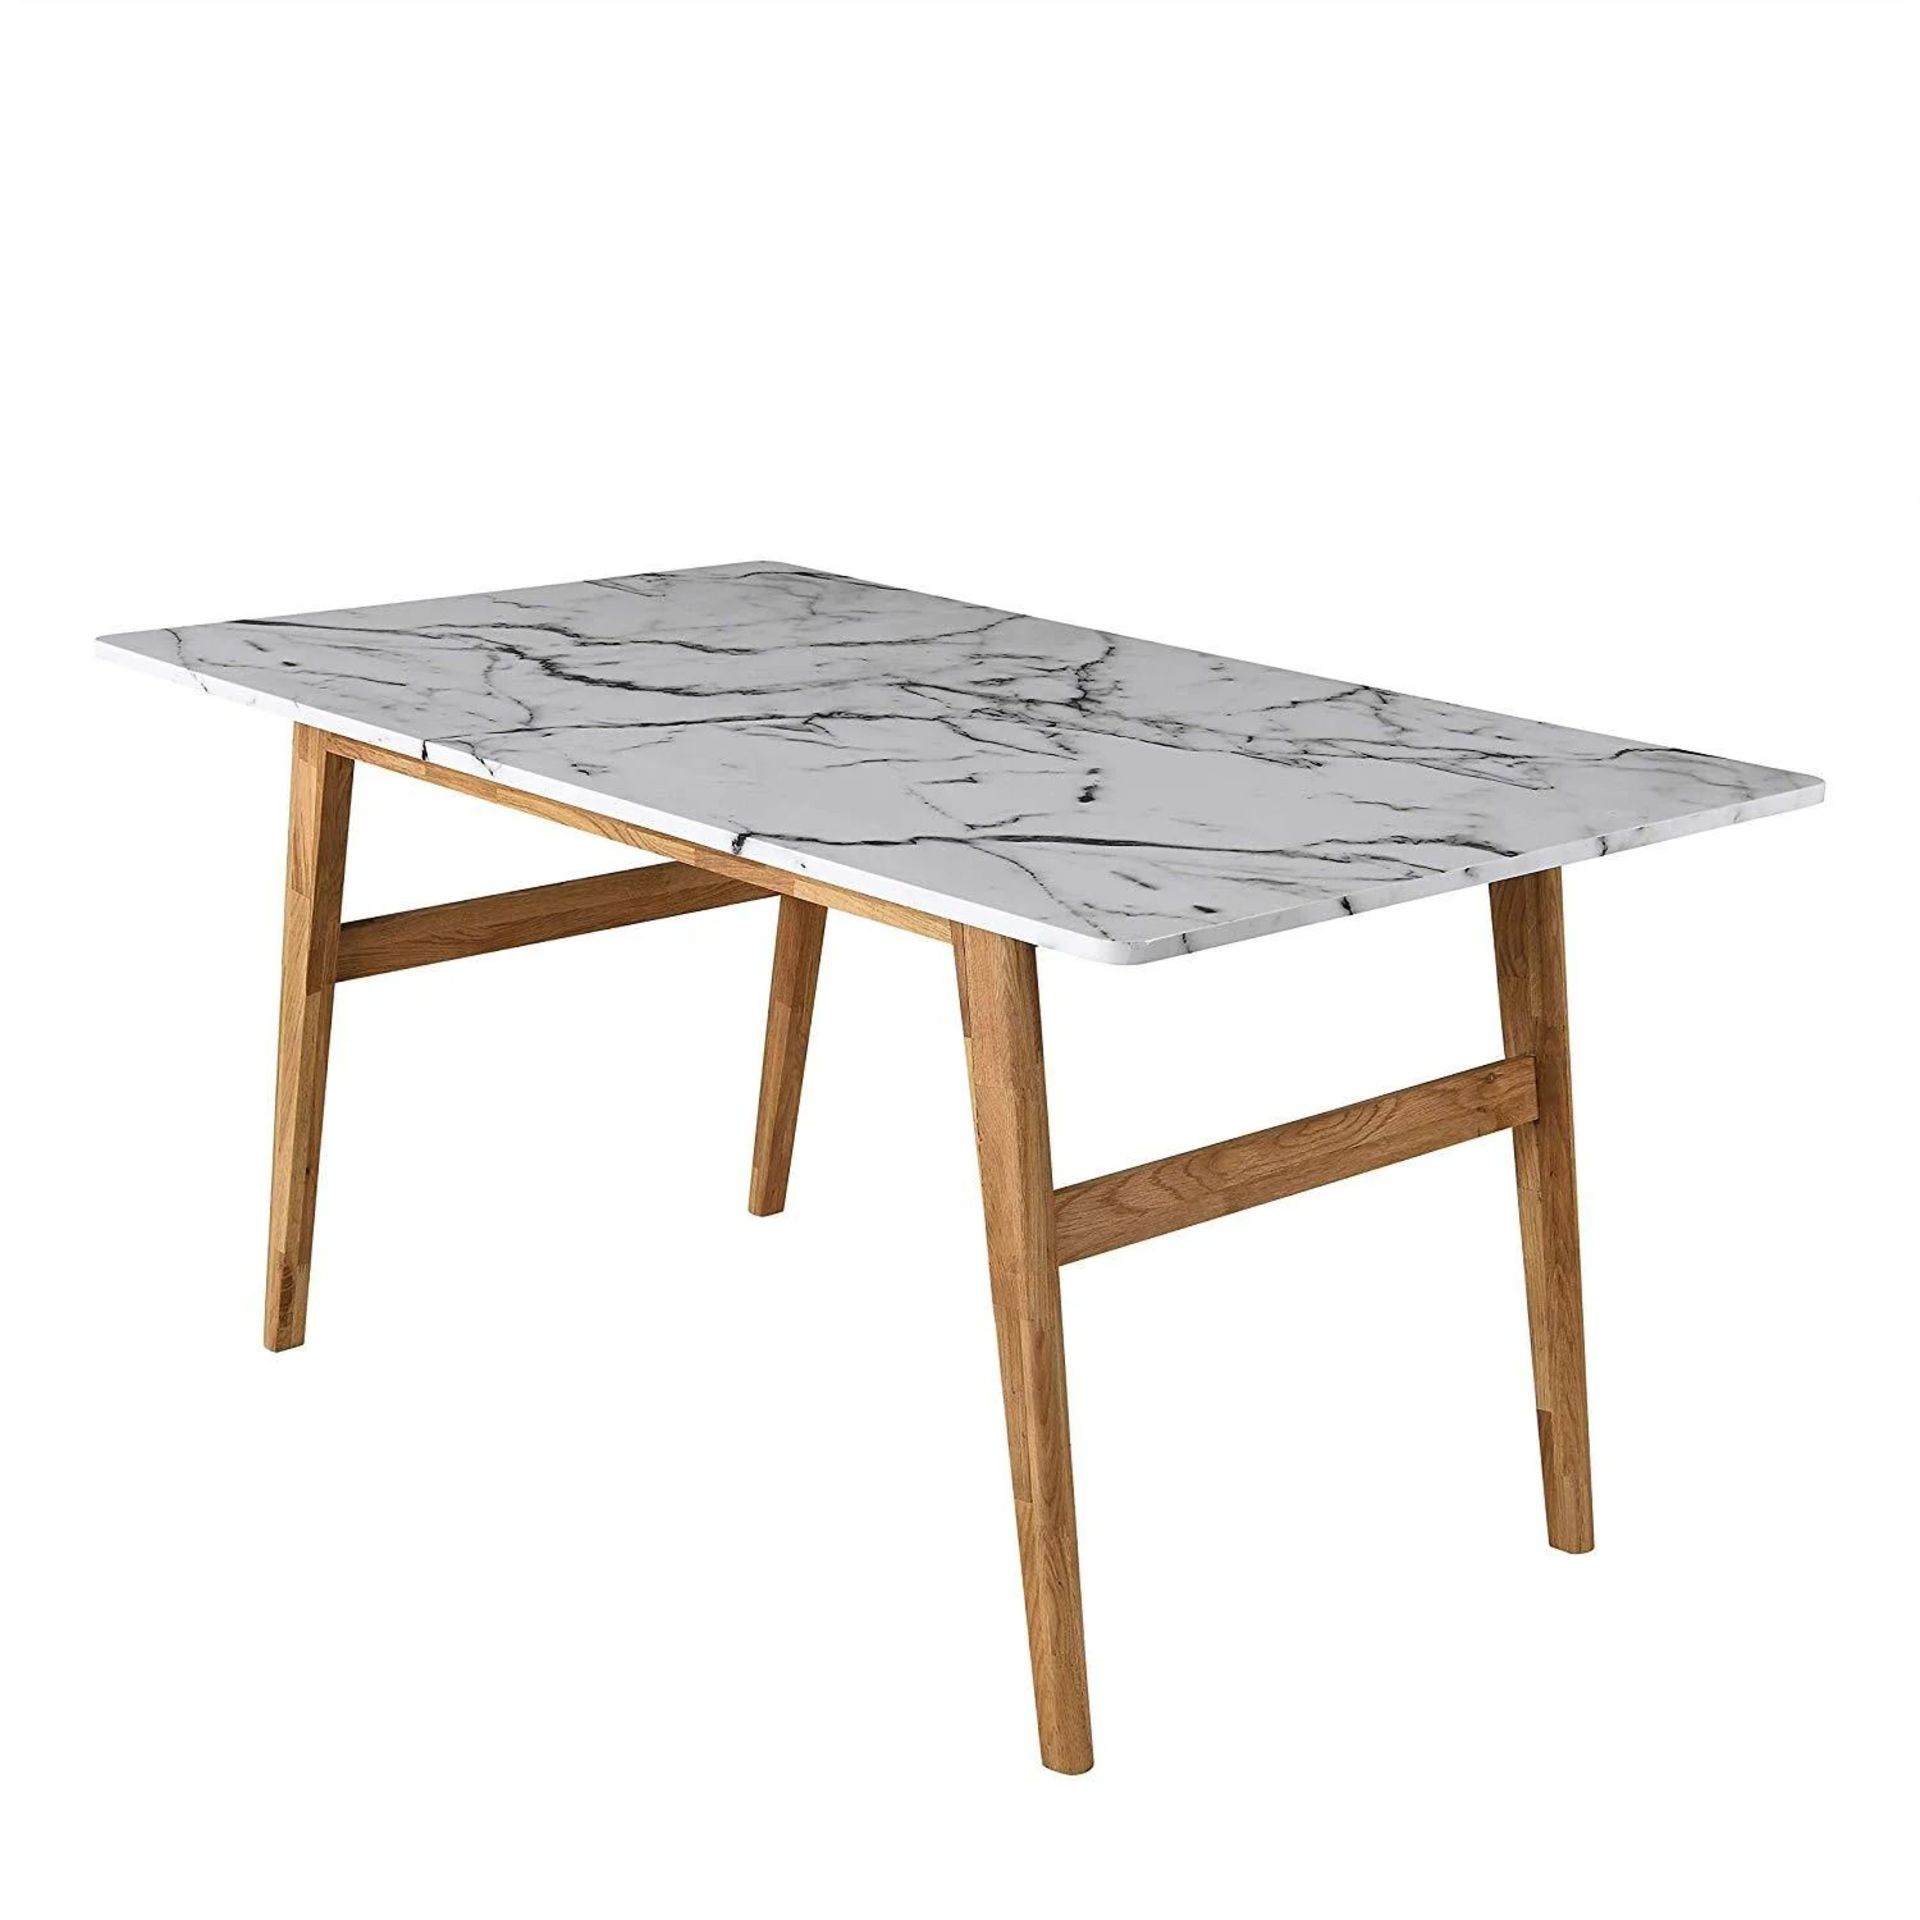 ASCONA White Marble Effect 6-Seater Dining Table with Solid Oak Legs. - ER30. RRP £449.99. The - Bild 2 aus 2